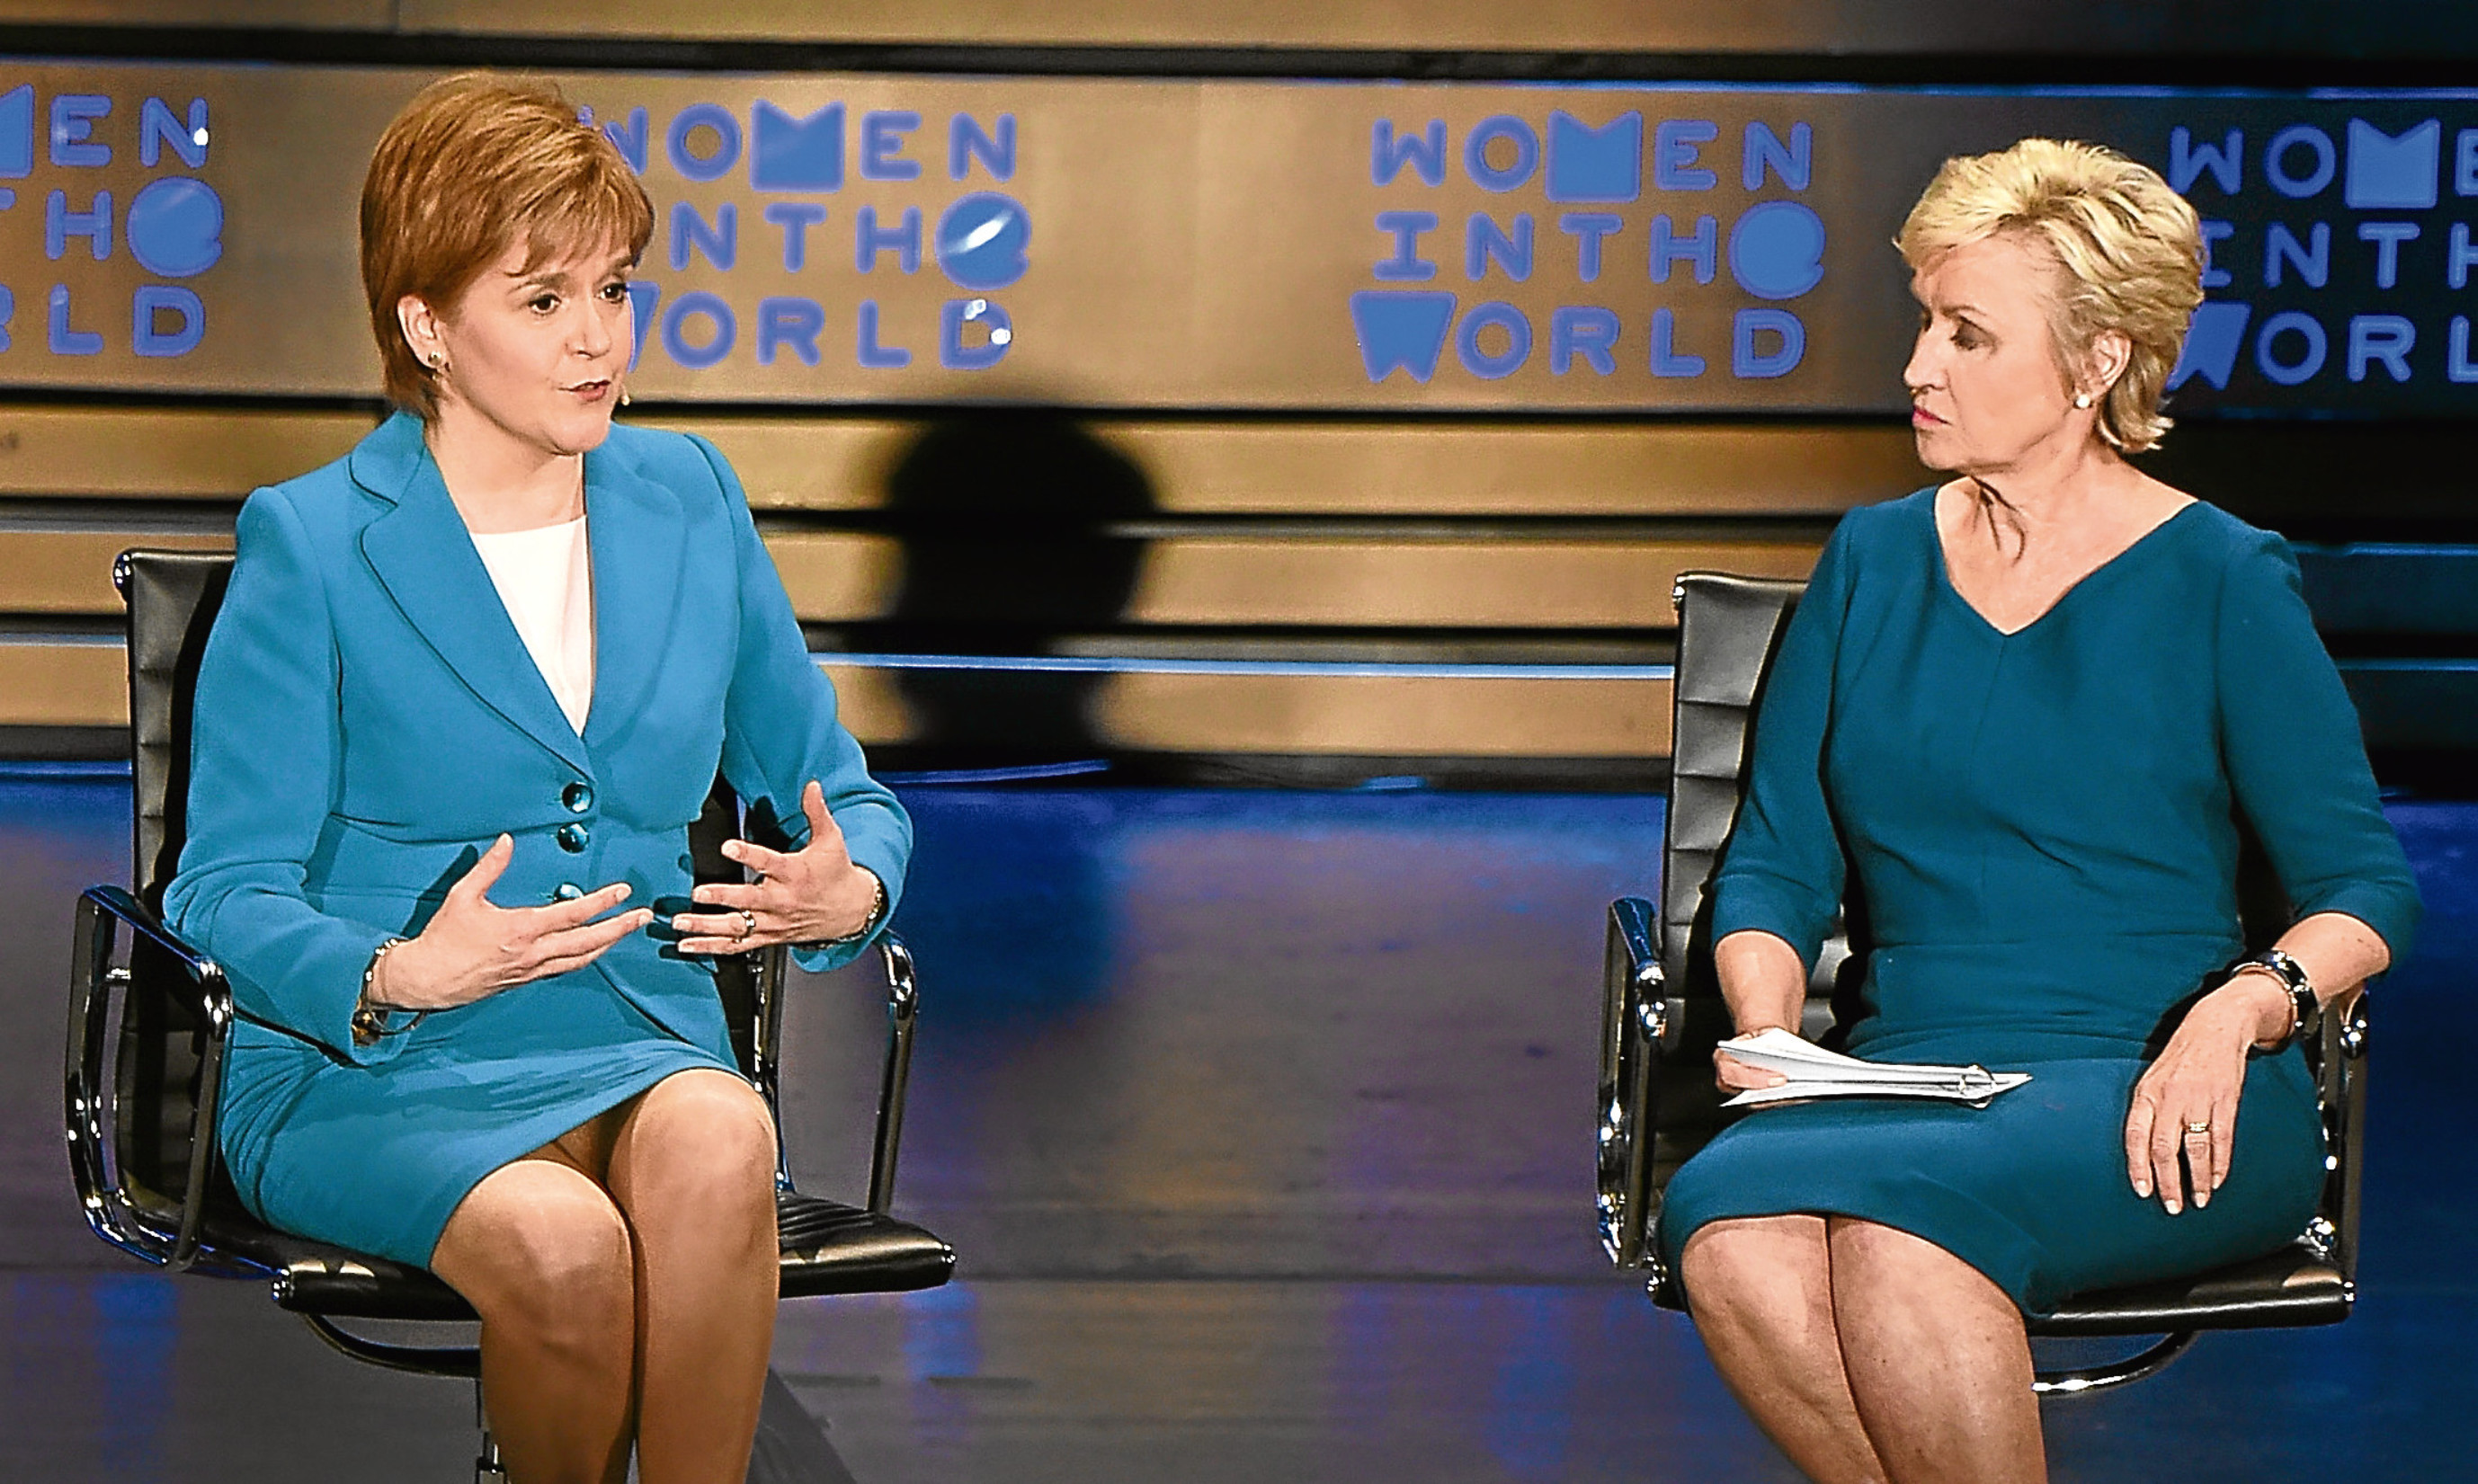 Nicola Sturgeon and journalist Tina Brown speak during the Women In The World Summit at the Lincoln Center, New York. Jenny wonders if the First Minister would be  better off spending time in England instead of the USA.